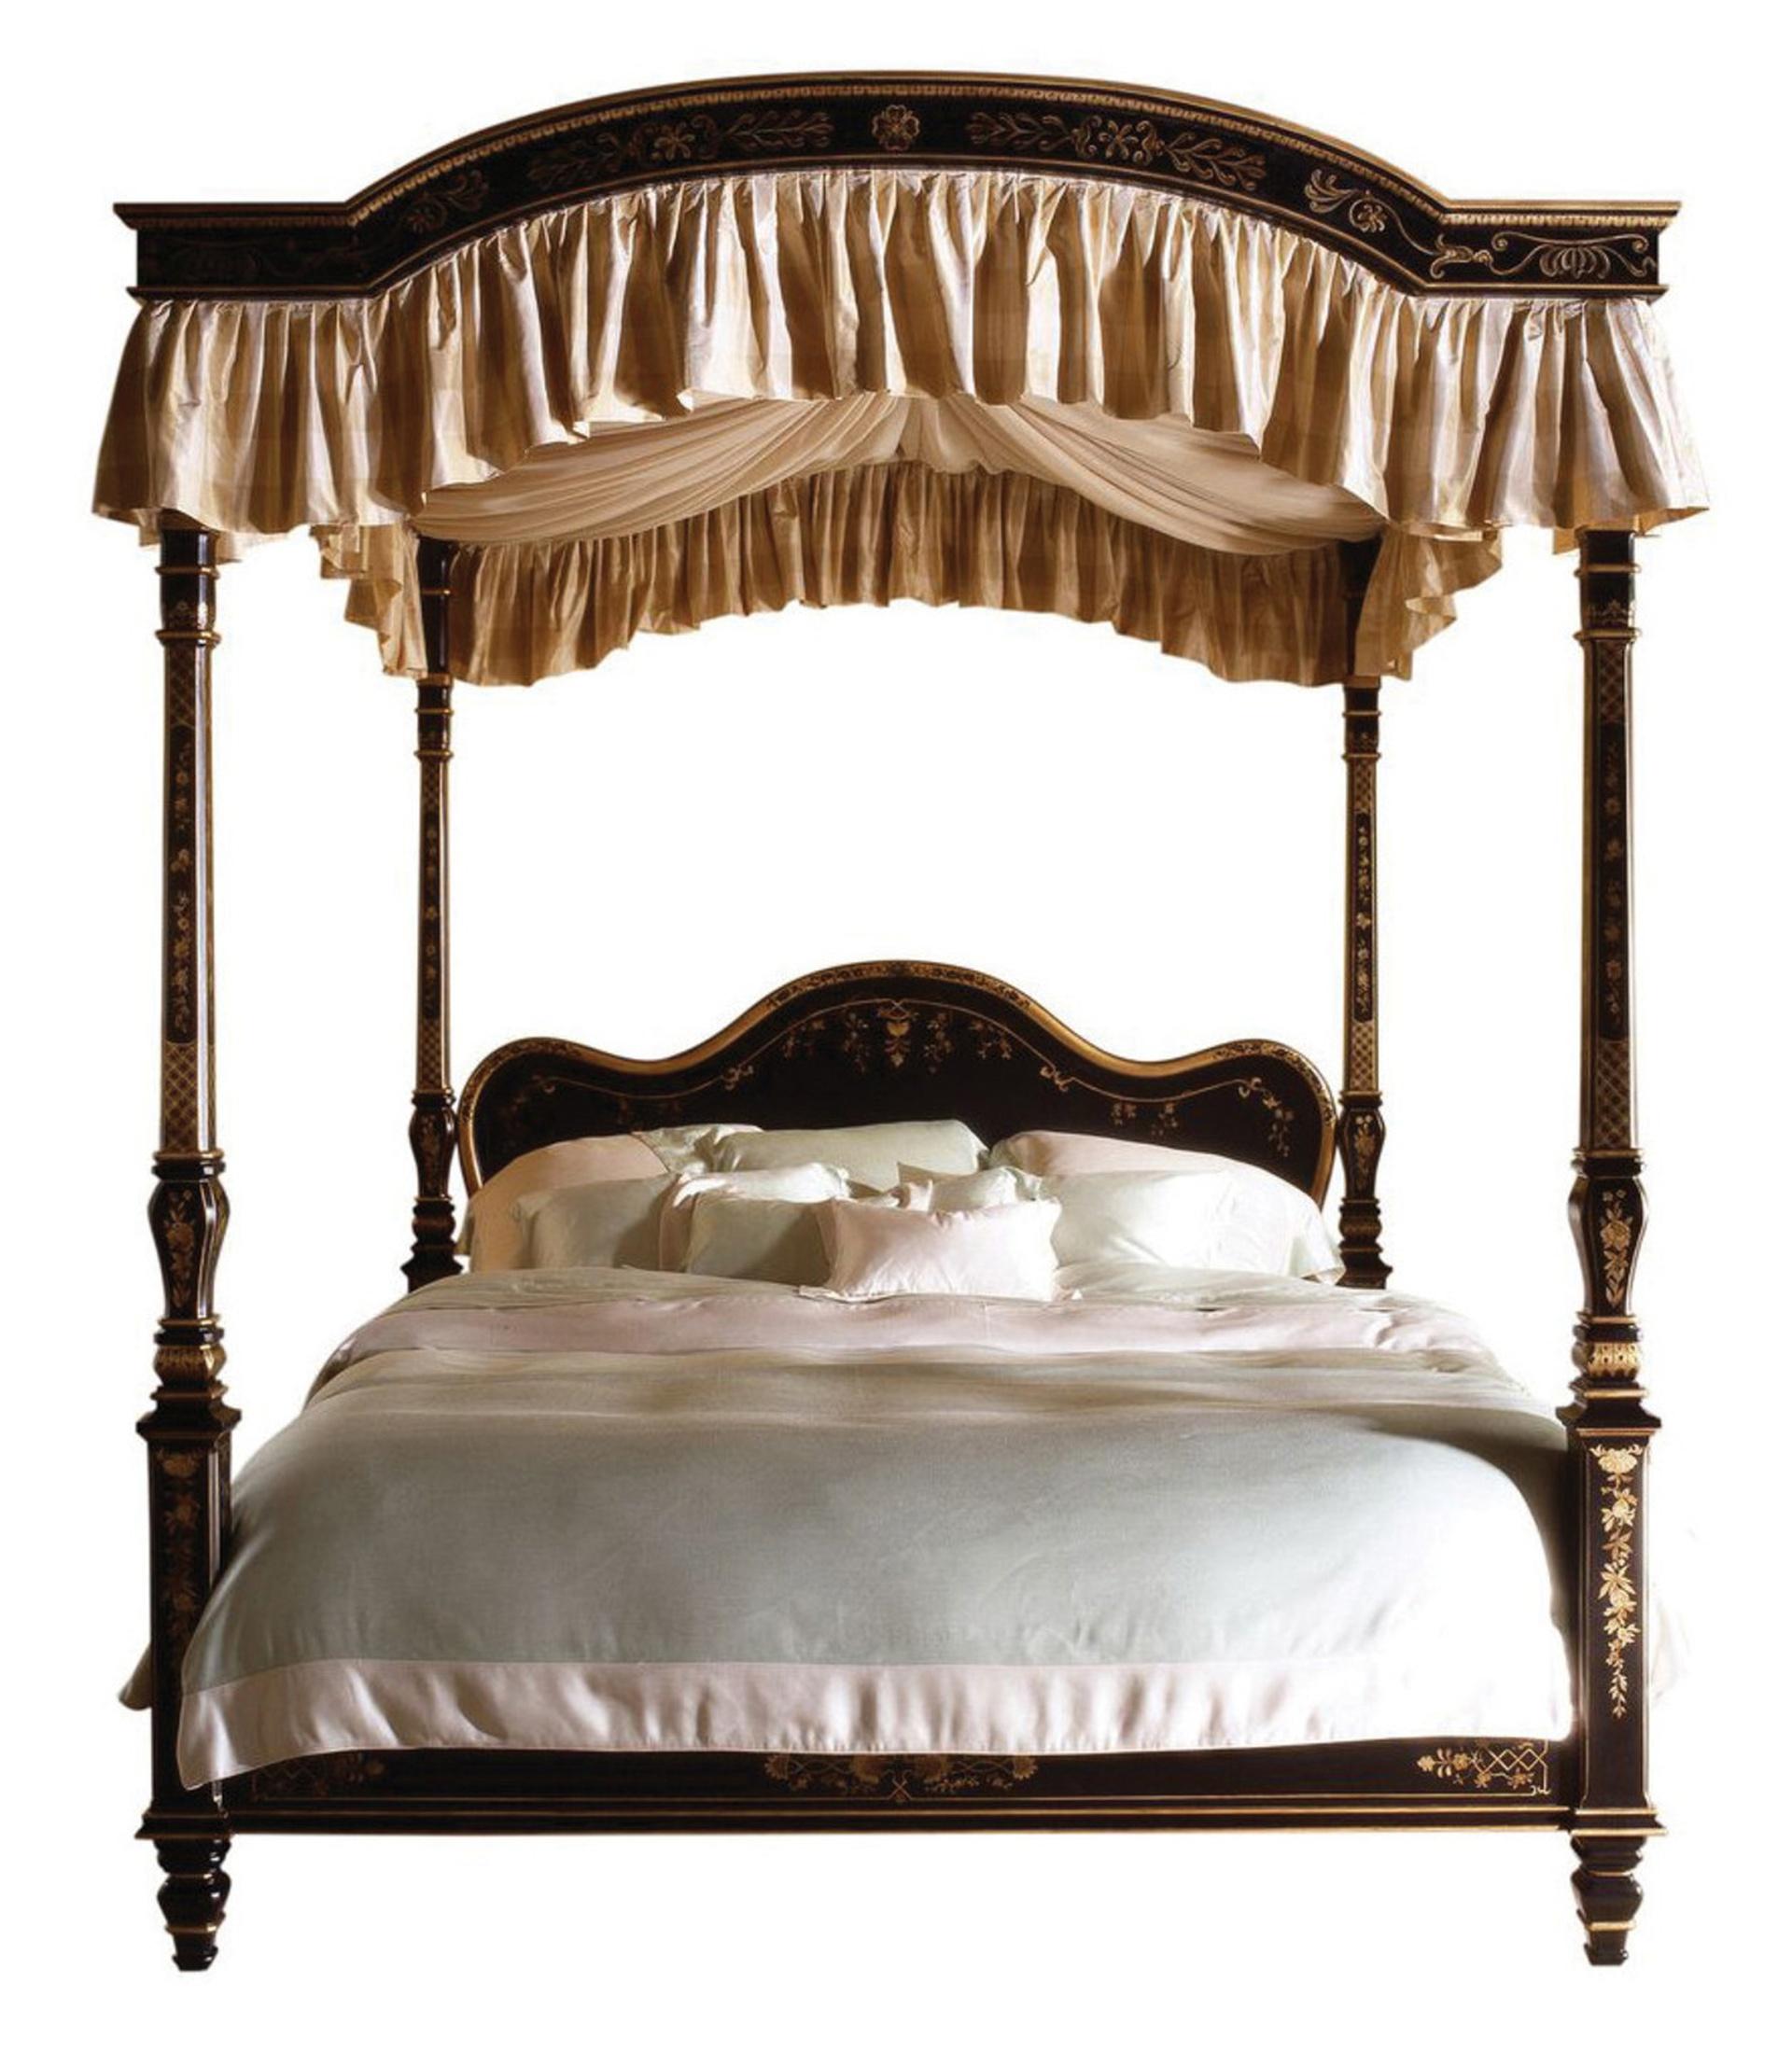 Hollywood Regency style Julia Gray poster bed. King sized Corbeau decorated four ebony and parcel-gilt decorated posts on this large and impressive poster bed designed by Julia Gray for EJ Victor. Leaf, vines, butterflies and scroll designed abound